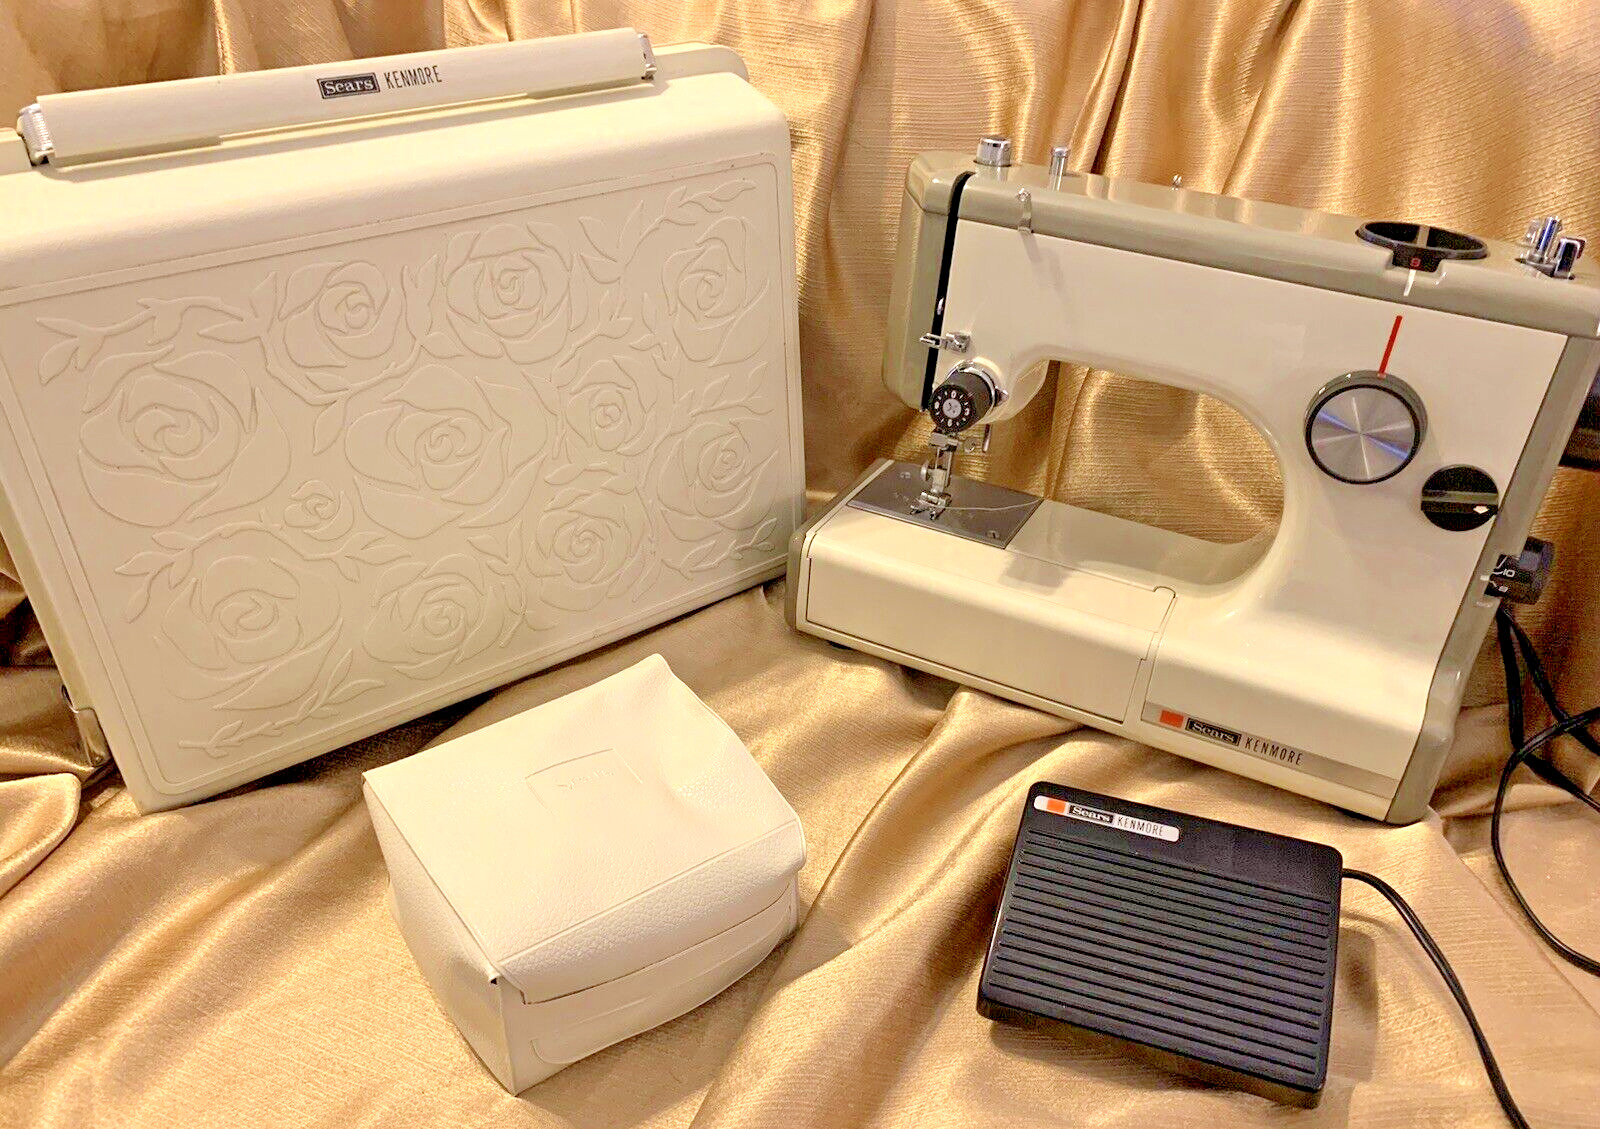 VTG Sears Kenmore Green Portable Sewing Machine JAPAN MADE 158-10302 - NEAR MINT